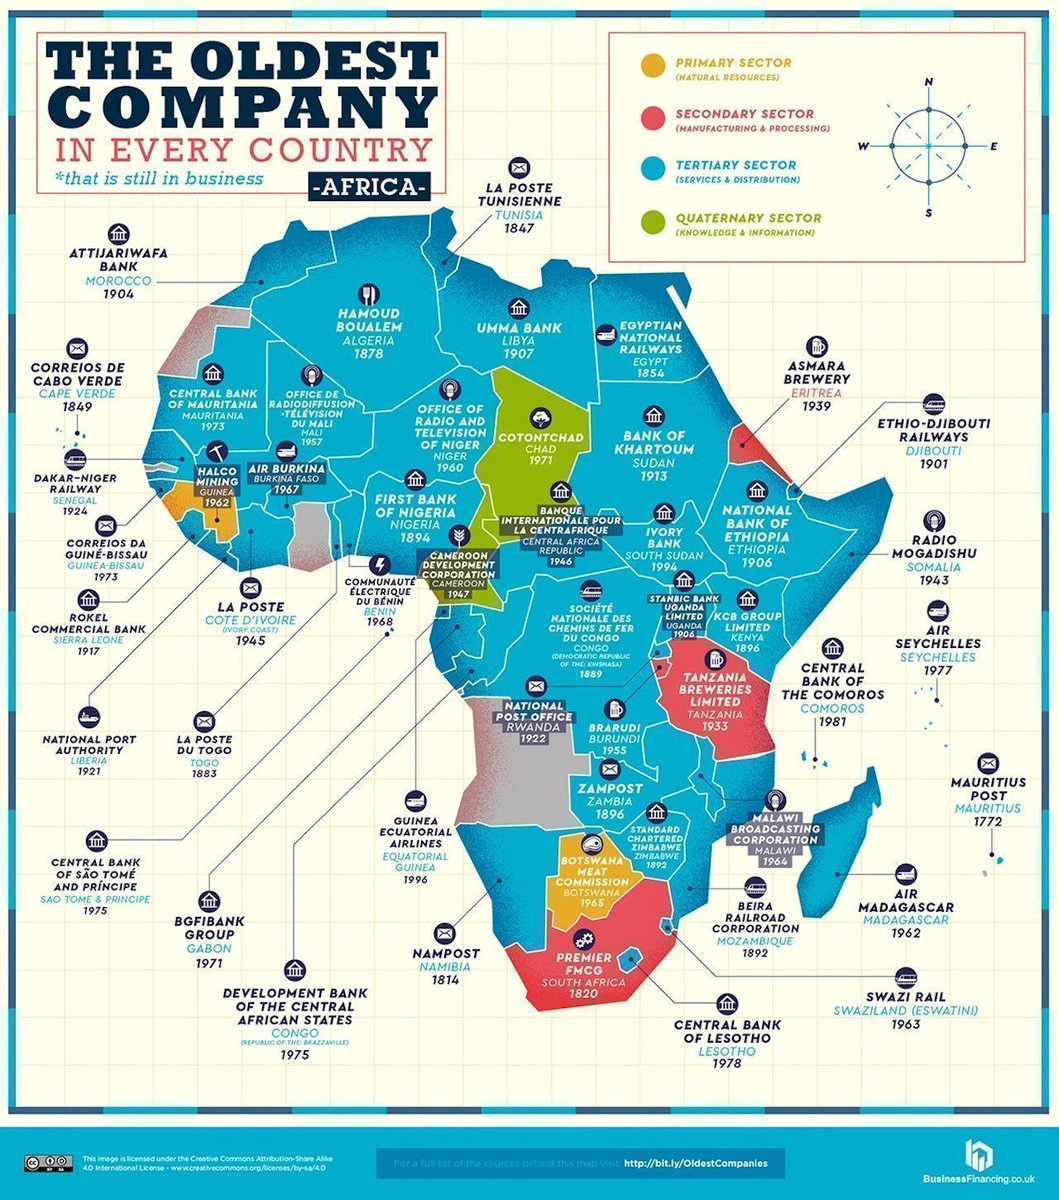 Charles Onyango-Obbo on Twitter: "This map shows the oldest company in every country. In Africa, Mauritius Post gets the longevity crown, having opened in 1772. fact, the top 10 oldest businesses